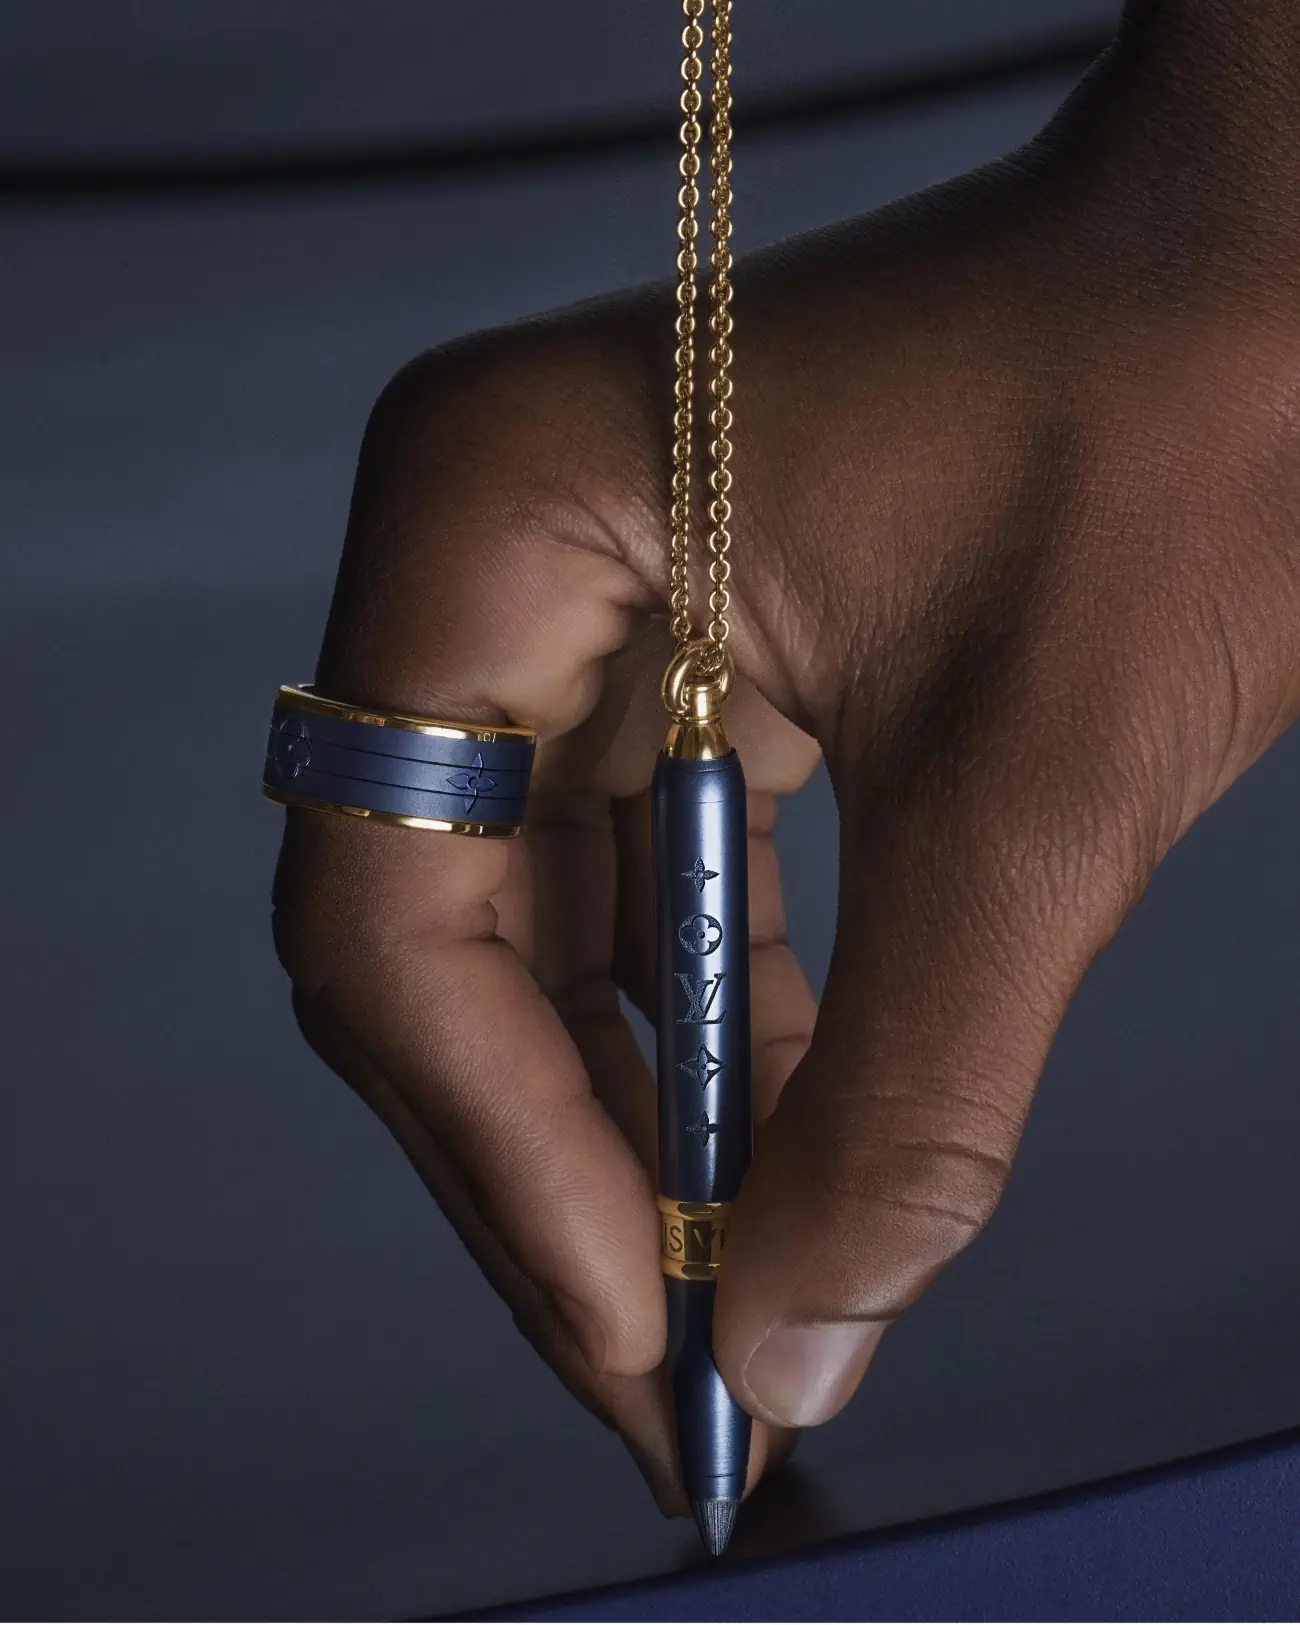 “Les Gastons Vuitton”, Louis Vuitton's bold new jewelry line for the modern man